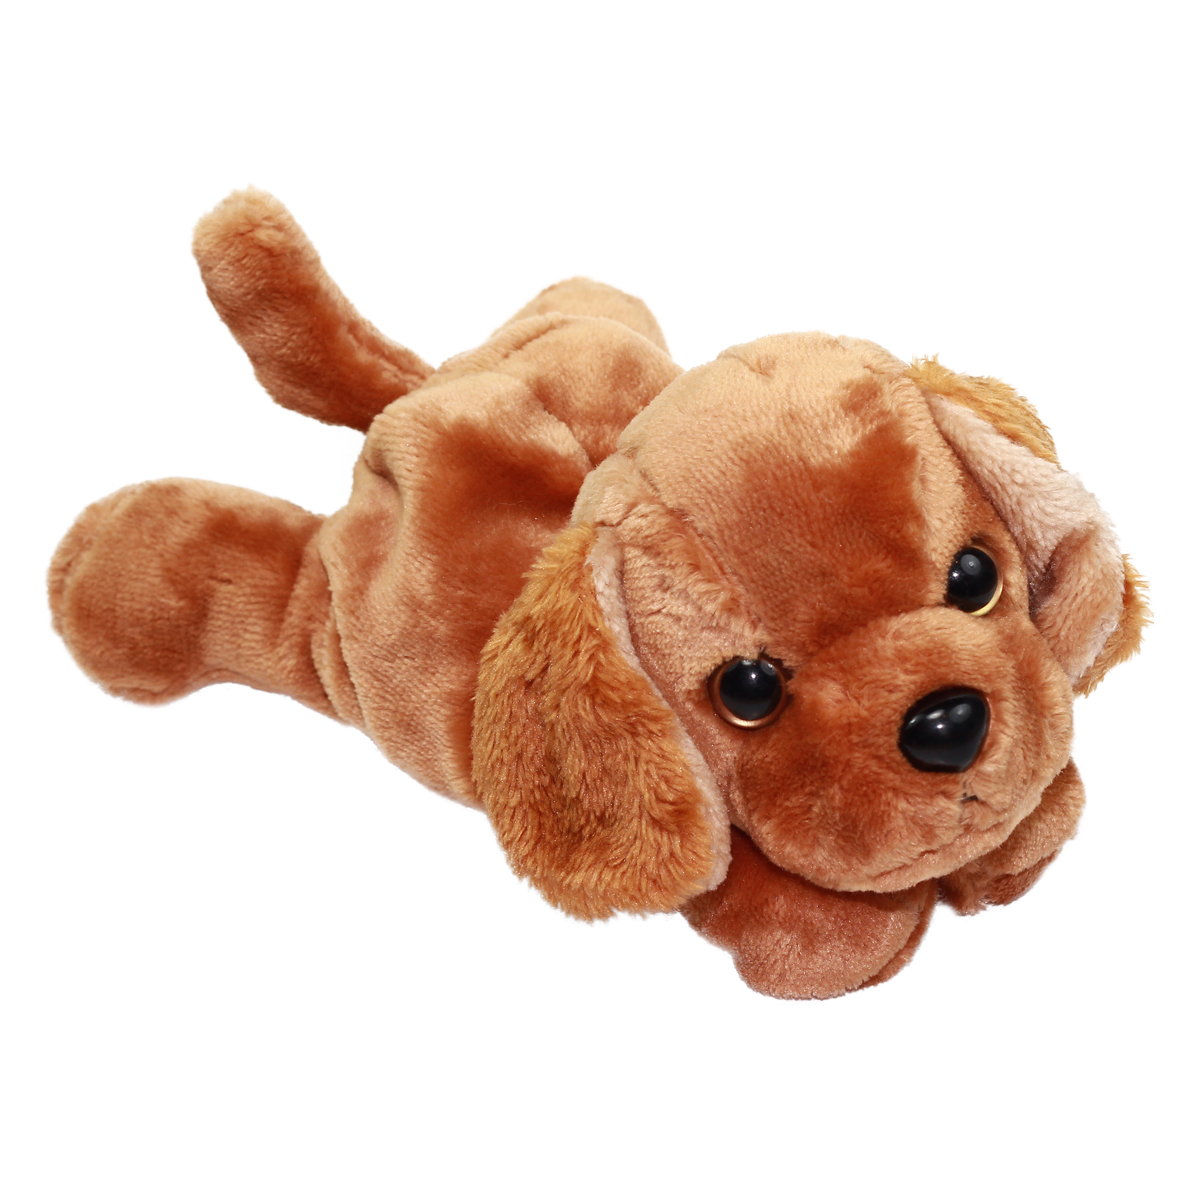 Kawaii Friends Dog Collection Brown Plush 9 Inches